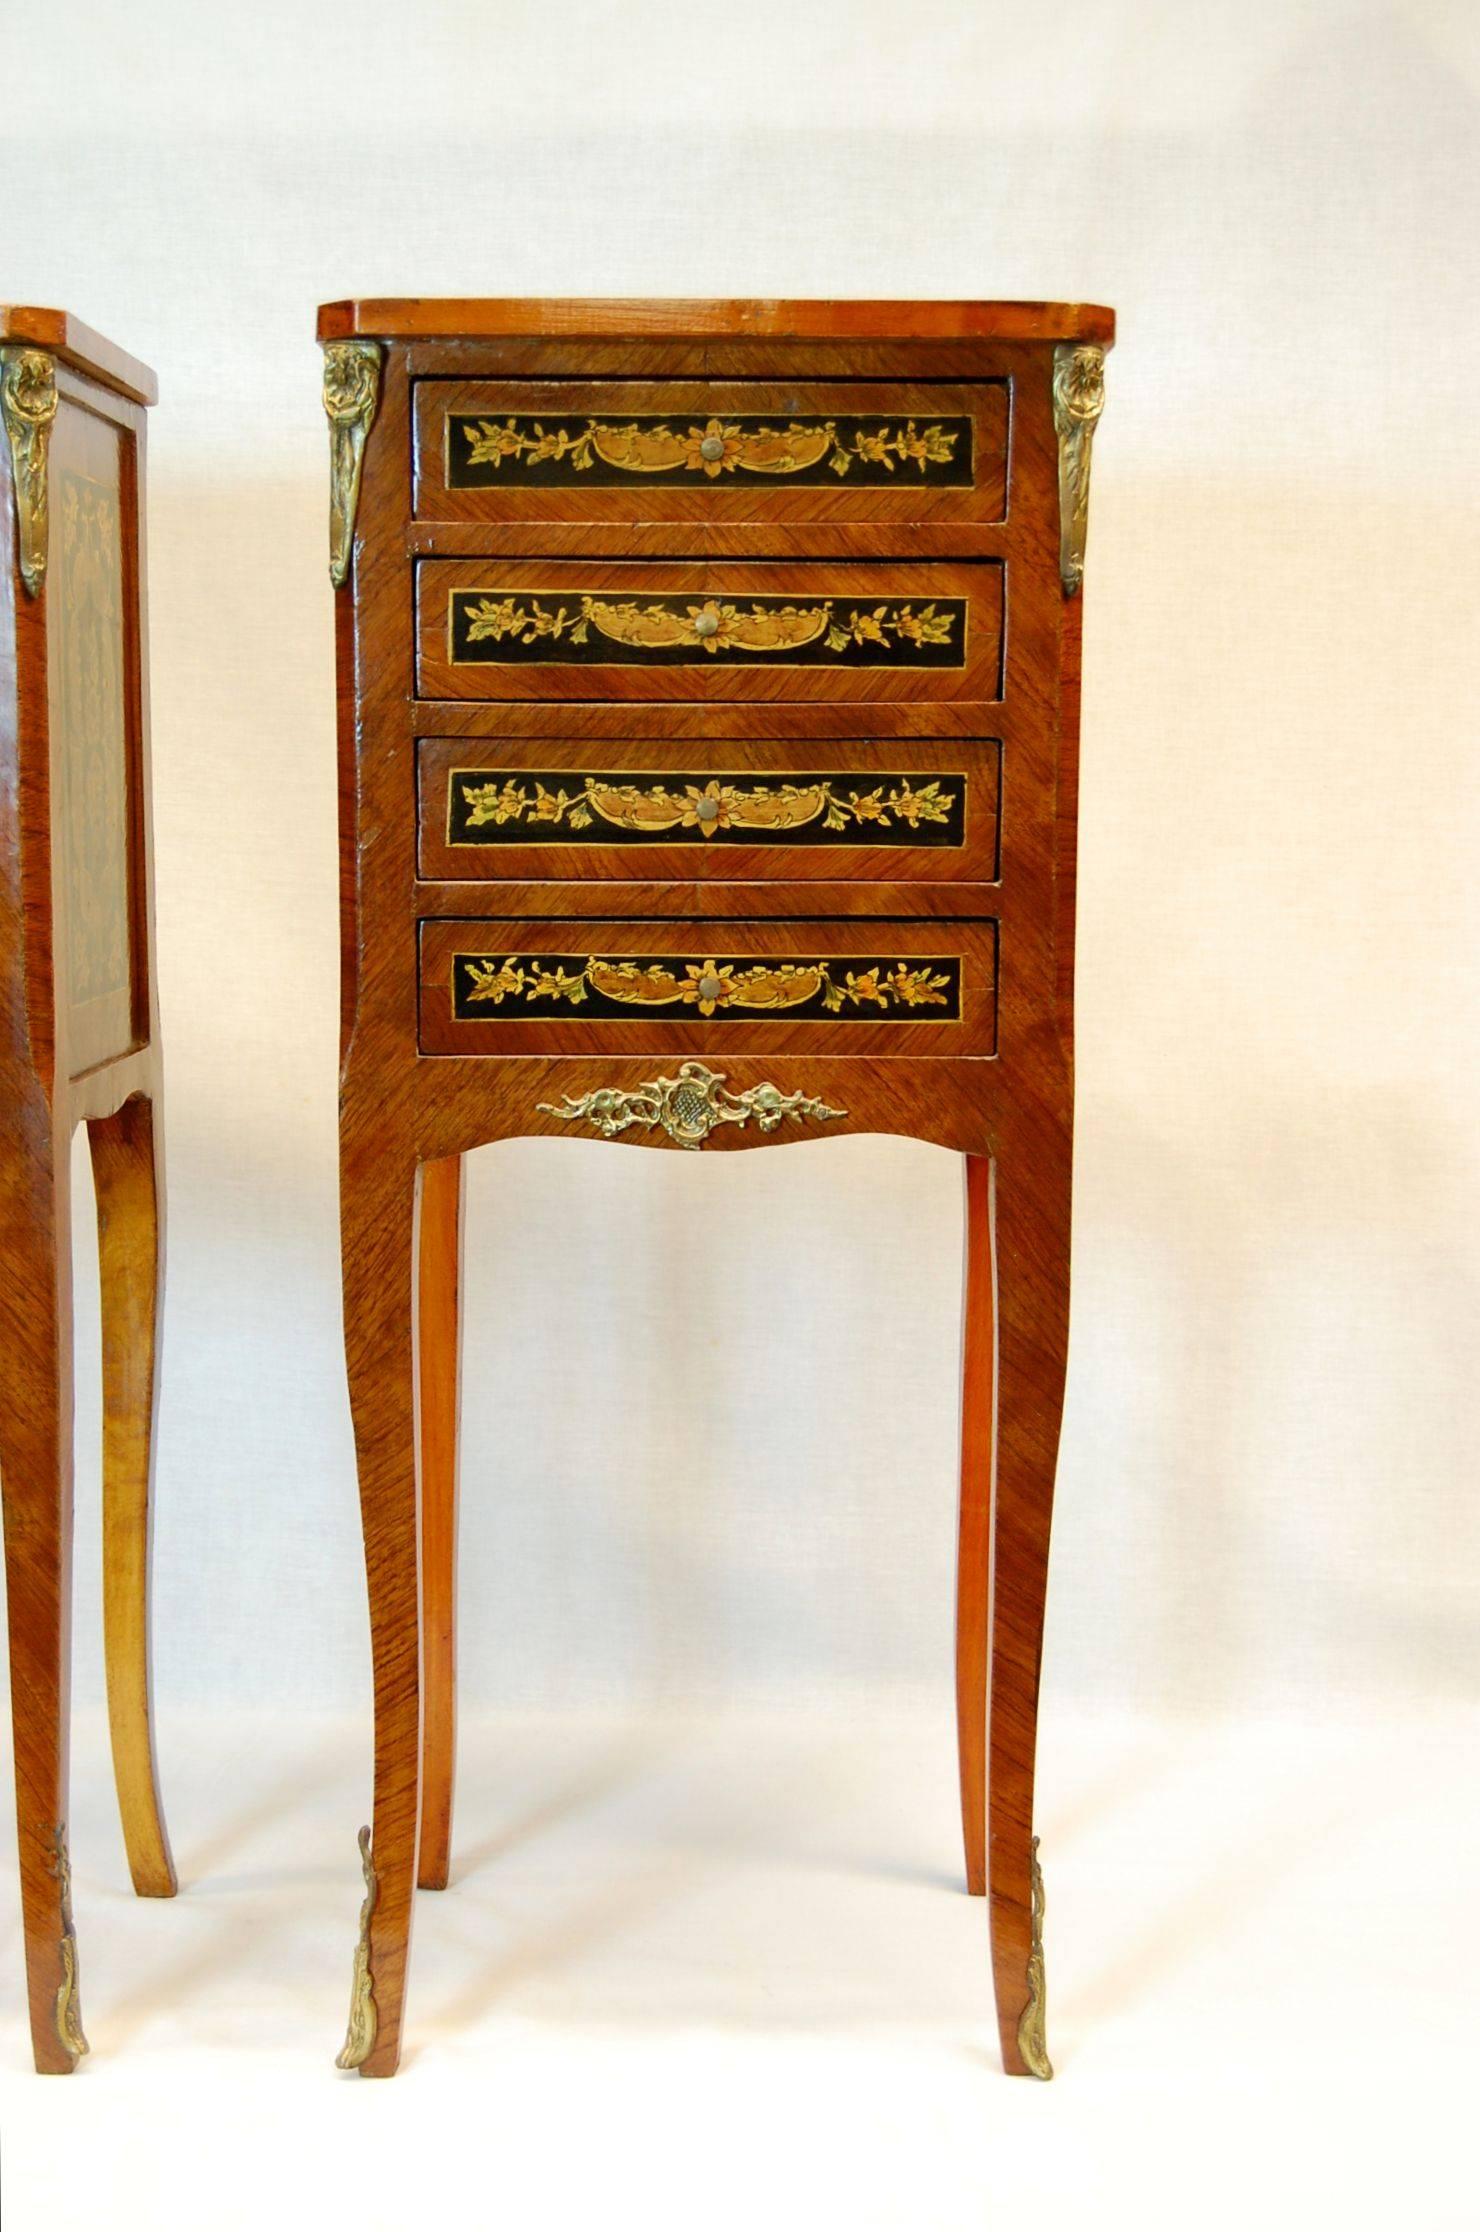 Louis XVI Pair of Reproduction French Style Inlaid Night Tables with Four Drawers